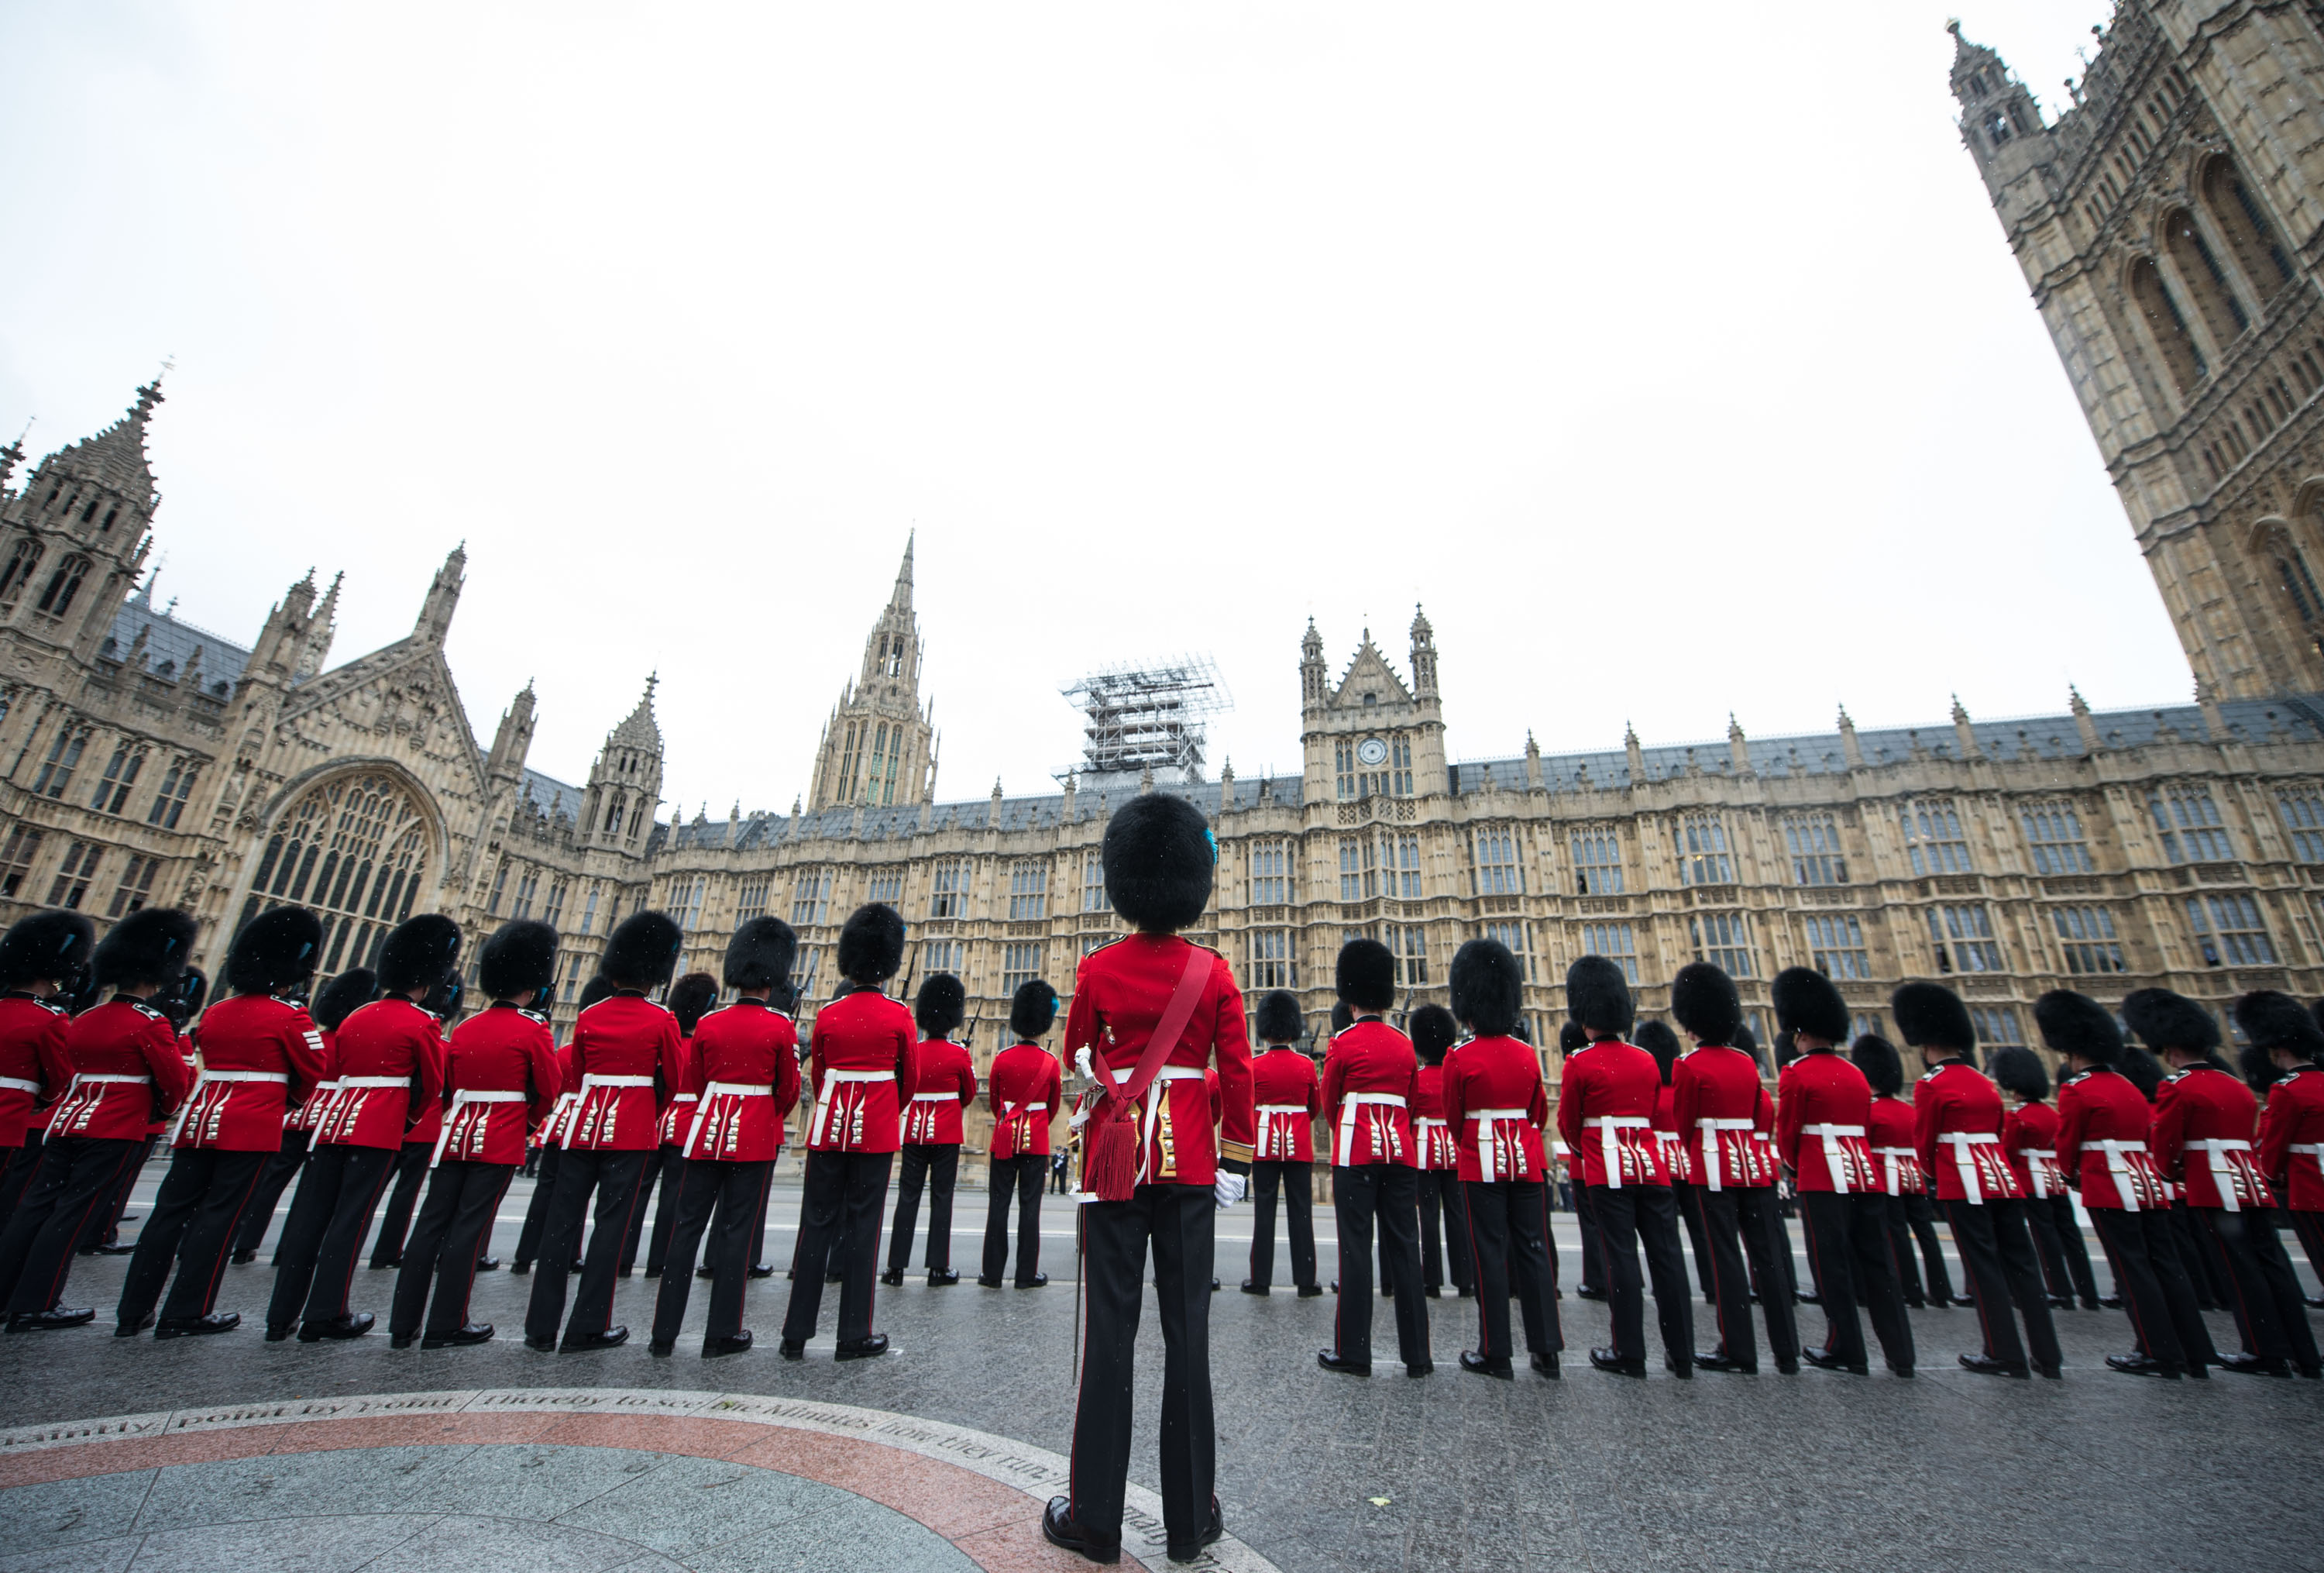 1st Battalion Irish Guards provided a large Guard of Honour at the House of Lords commanded by Lt Col Ian Turner DSO, and accompanied by the Band of the Regiment and the Corps of Drums of the Battalion. The armed forces played a major role in the pomp and ceremony that is part of the State Opening of Parliament, which took place today. In all, 1308 members of the Armed Forces and 217 horses were on public show in a variety of ceremonial roles. The State Opening of Parliament is one of the most colourful events in the London Ceremonial calendar when all elements of the Army’s Household Division, and other elements of the Armed Forces, line the streets and escort Her Majesty The Queen’s procession from Buckingham Palace to the House of Lords. The State Opening marks the formal start of the next parliamentary session. The primary purpose of this colourful tradition is to set out the government's legislative agenda to both Houses of Parliament in the Queen's Speech. Military units taking part this year were The King’s Troop Royal Horse Artillery, the Household Cavalry Mounted Regiment, 1st Battalion Irish Guards, Nijmegen Company Grenadier Guards, Number 7 Company Coldstream Guards, F Company Scots Guards, 1st Battalion Coldstream Guards, Honourable Artillery Company, the Royal Air Force, the Royal Navy, The Royal Artillery Band, Band of the Grenadier Guards, Band of the Coldstream Guards, Band of the Scots Guards, Band of the Irish Guards, Band of the Welsh Guards, with 10 Signal Regiment in support. The Processional Route was by way of The Mall, Horse Guards Road, on to Horse Guards Parade Square, along Whitehall ending at Parliament Street.